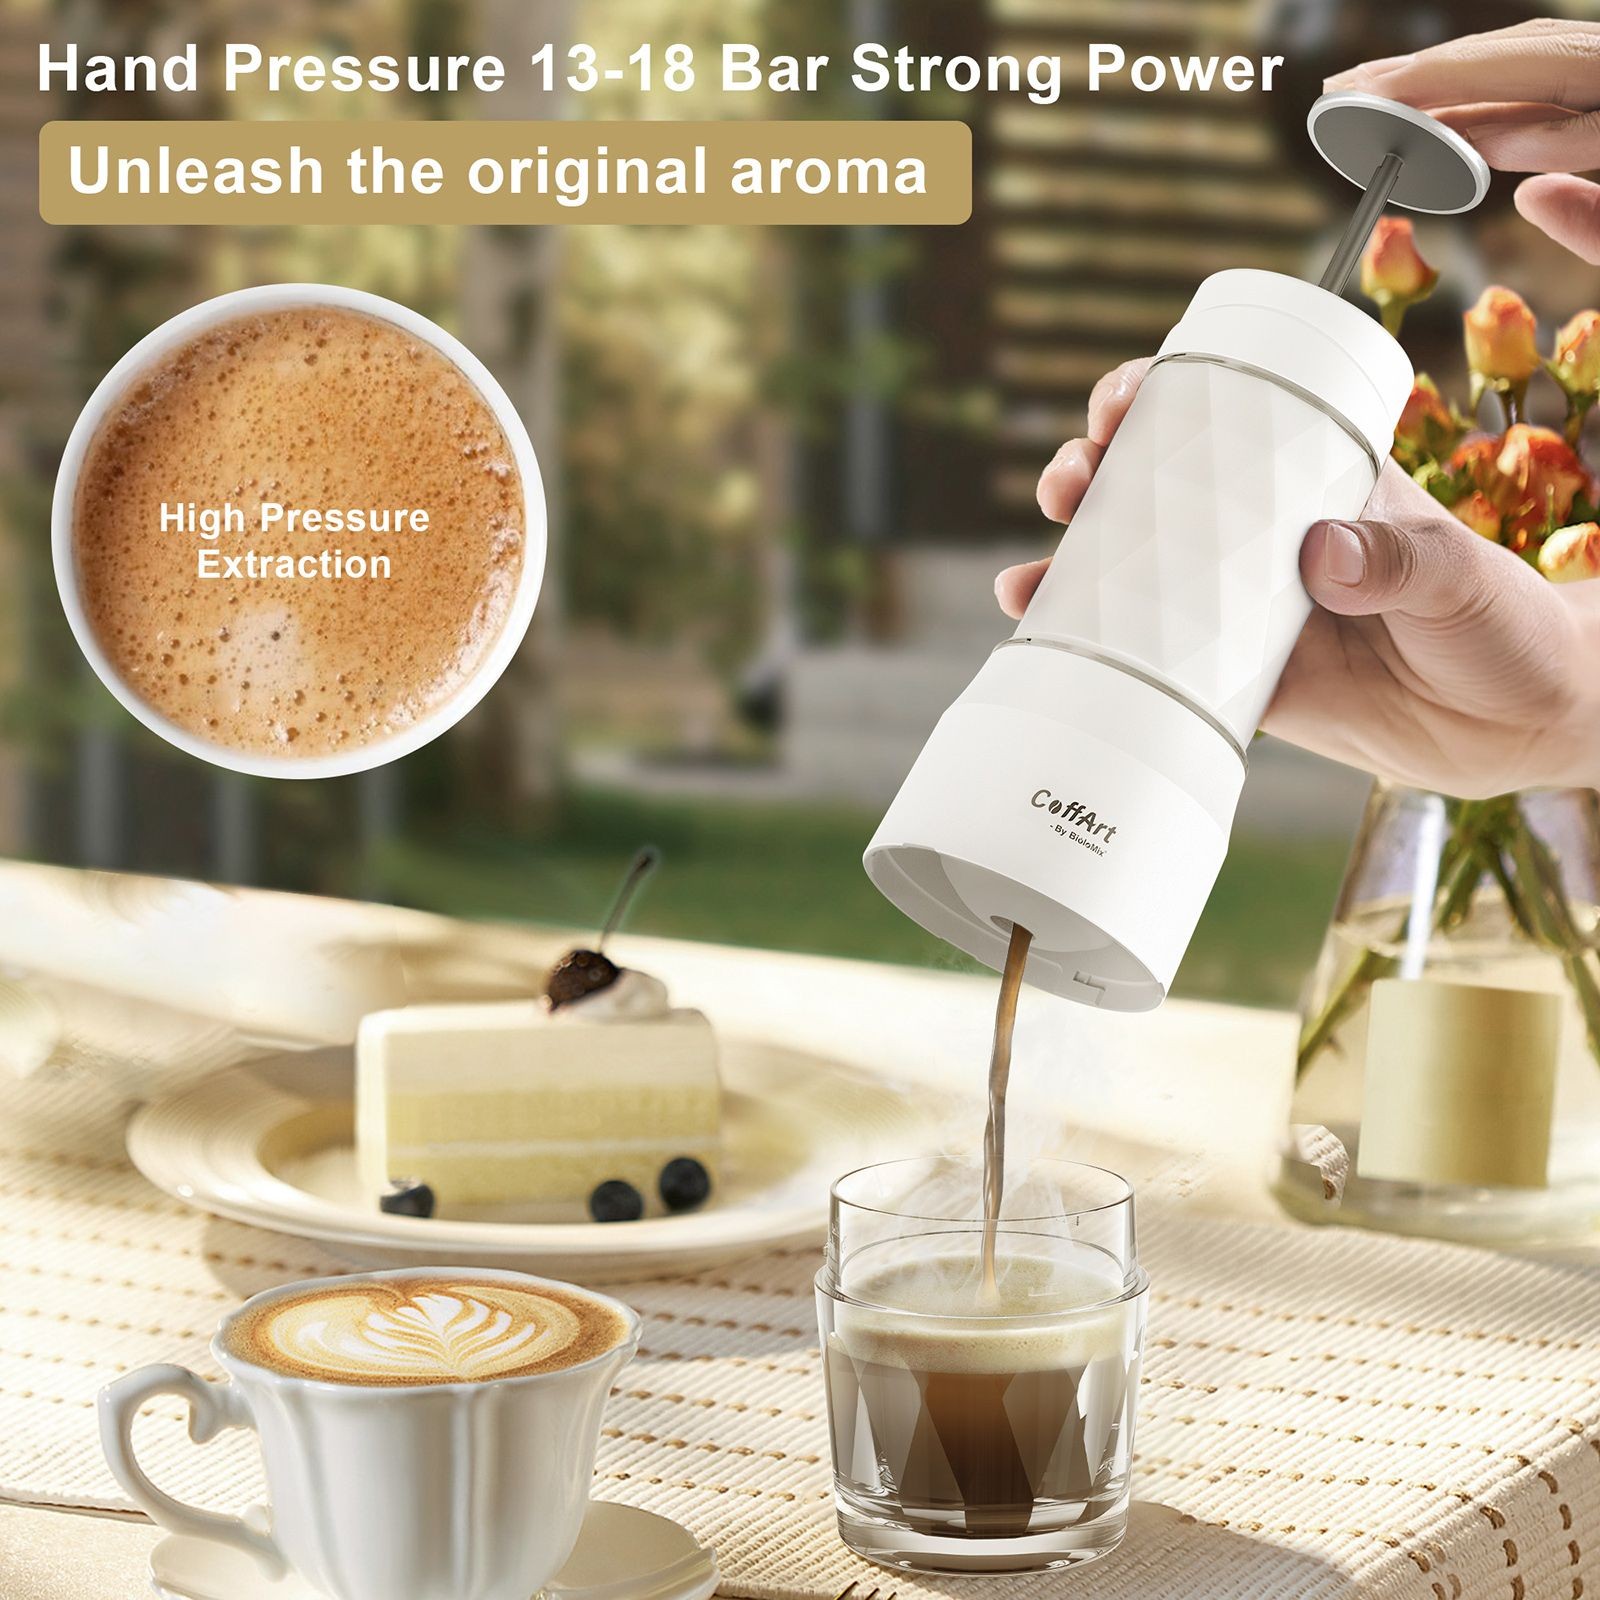 BioloMix HS8439 Portable Coffee Maker, 13-18Bar Pressure Hand Press Capsule Ground Coffee Brewer, 80ml Water Container, for Travel and Picnic - White